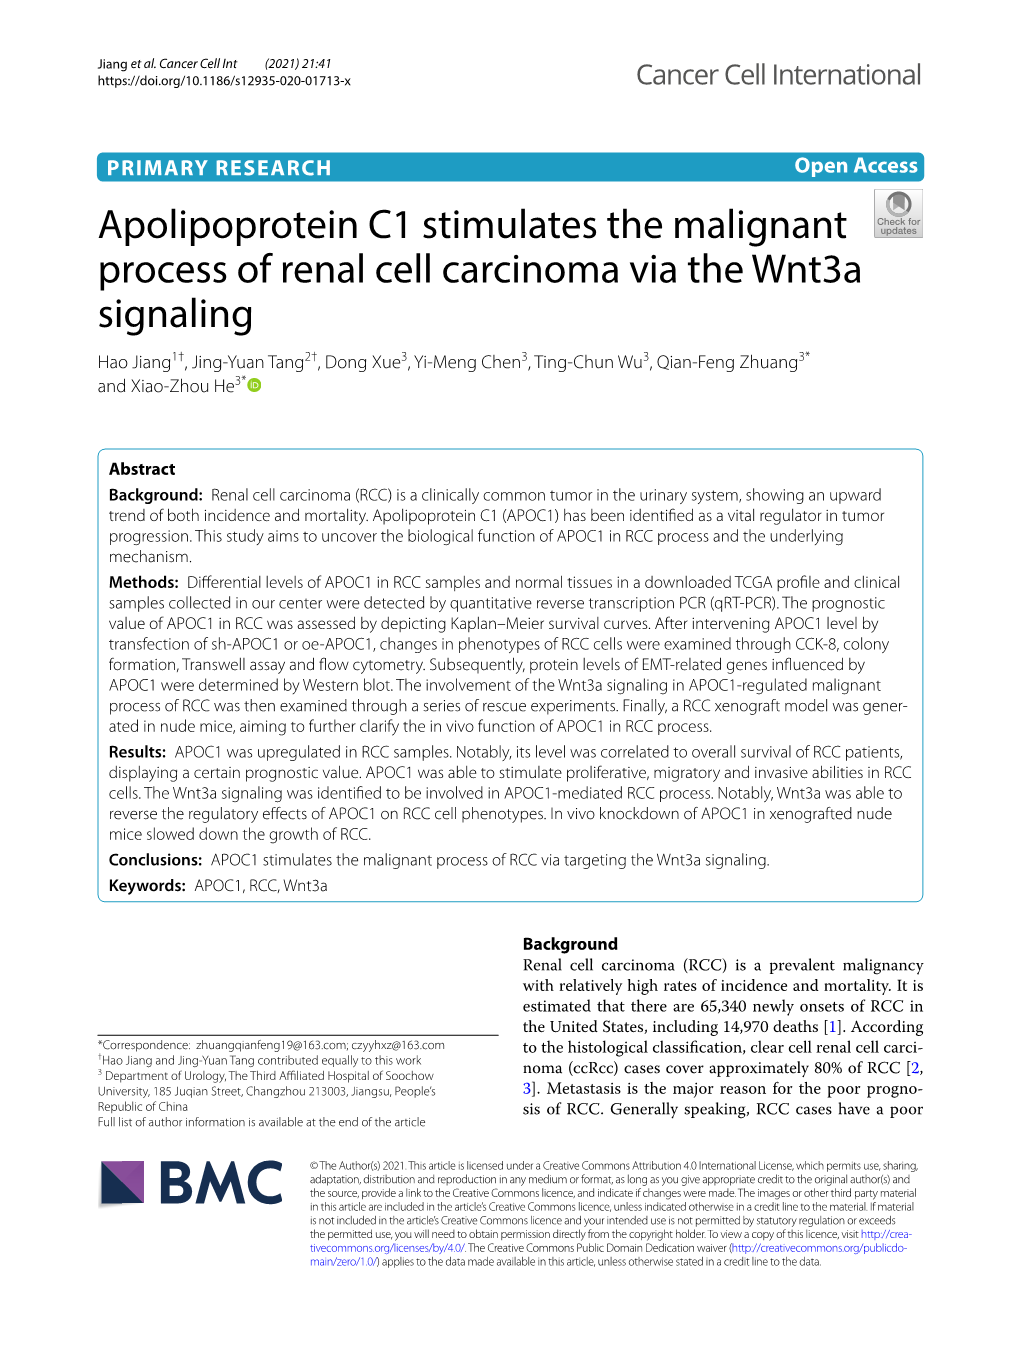 Apolipoprotein C1 Stimulates the Malignant Process of Renal Cell